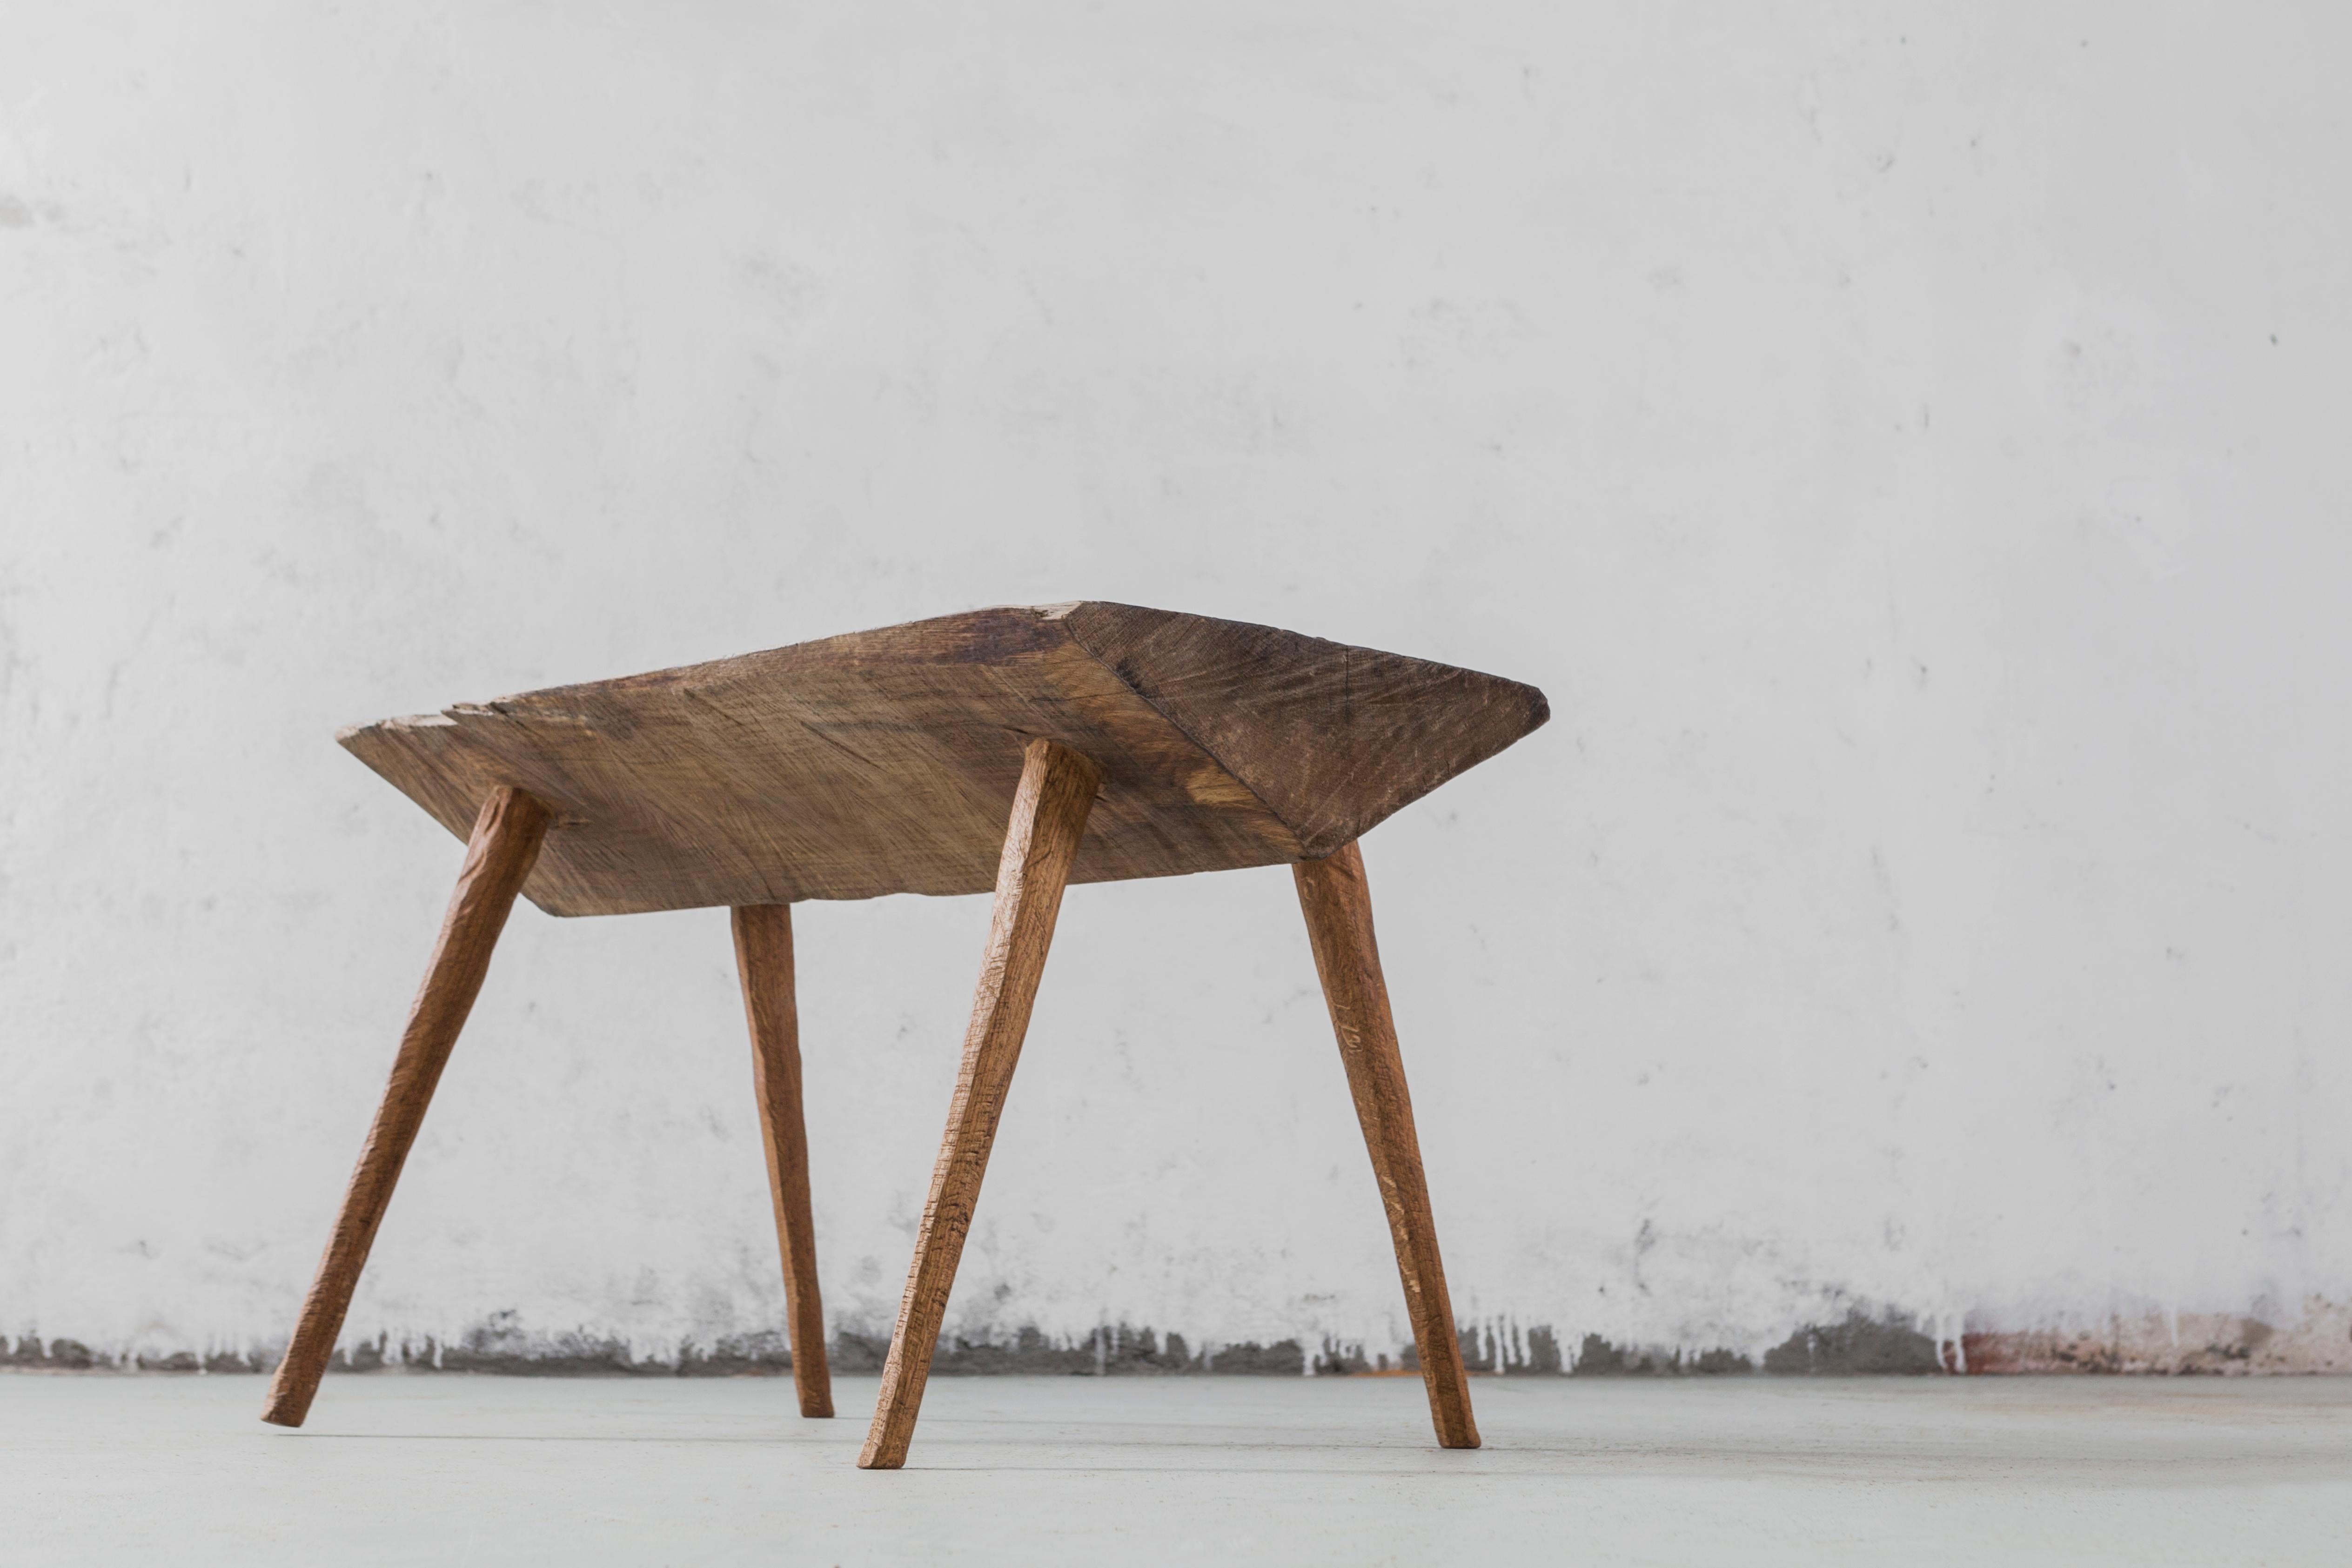 Russian Contemporary Brutalist Style Small Table #9 in Solid Oak and Linseed Oil For Sale